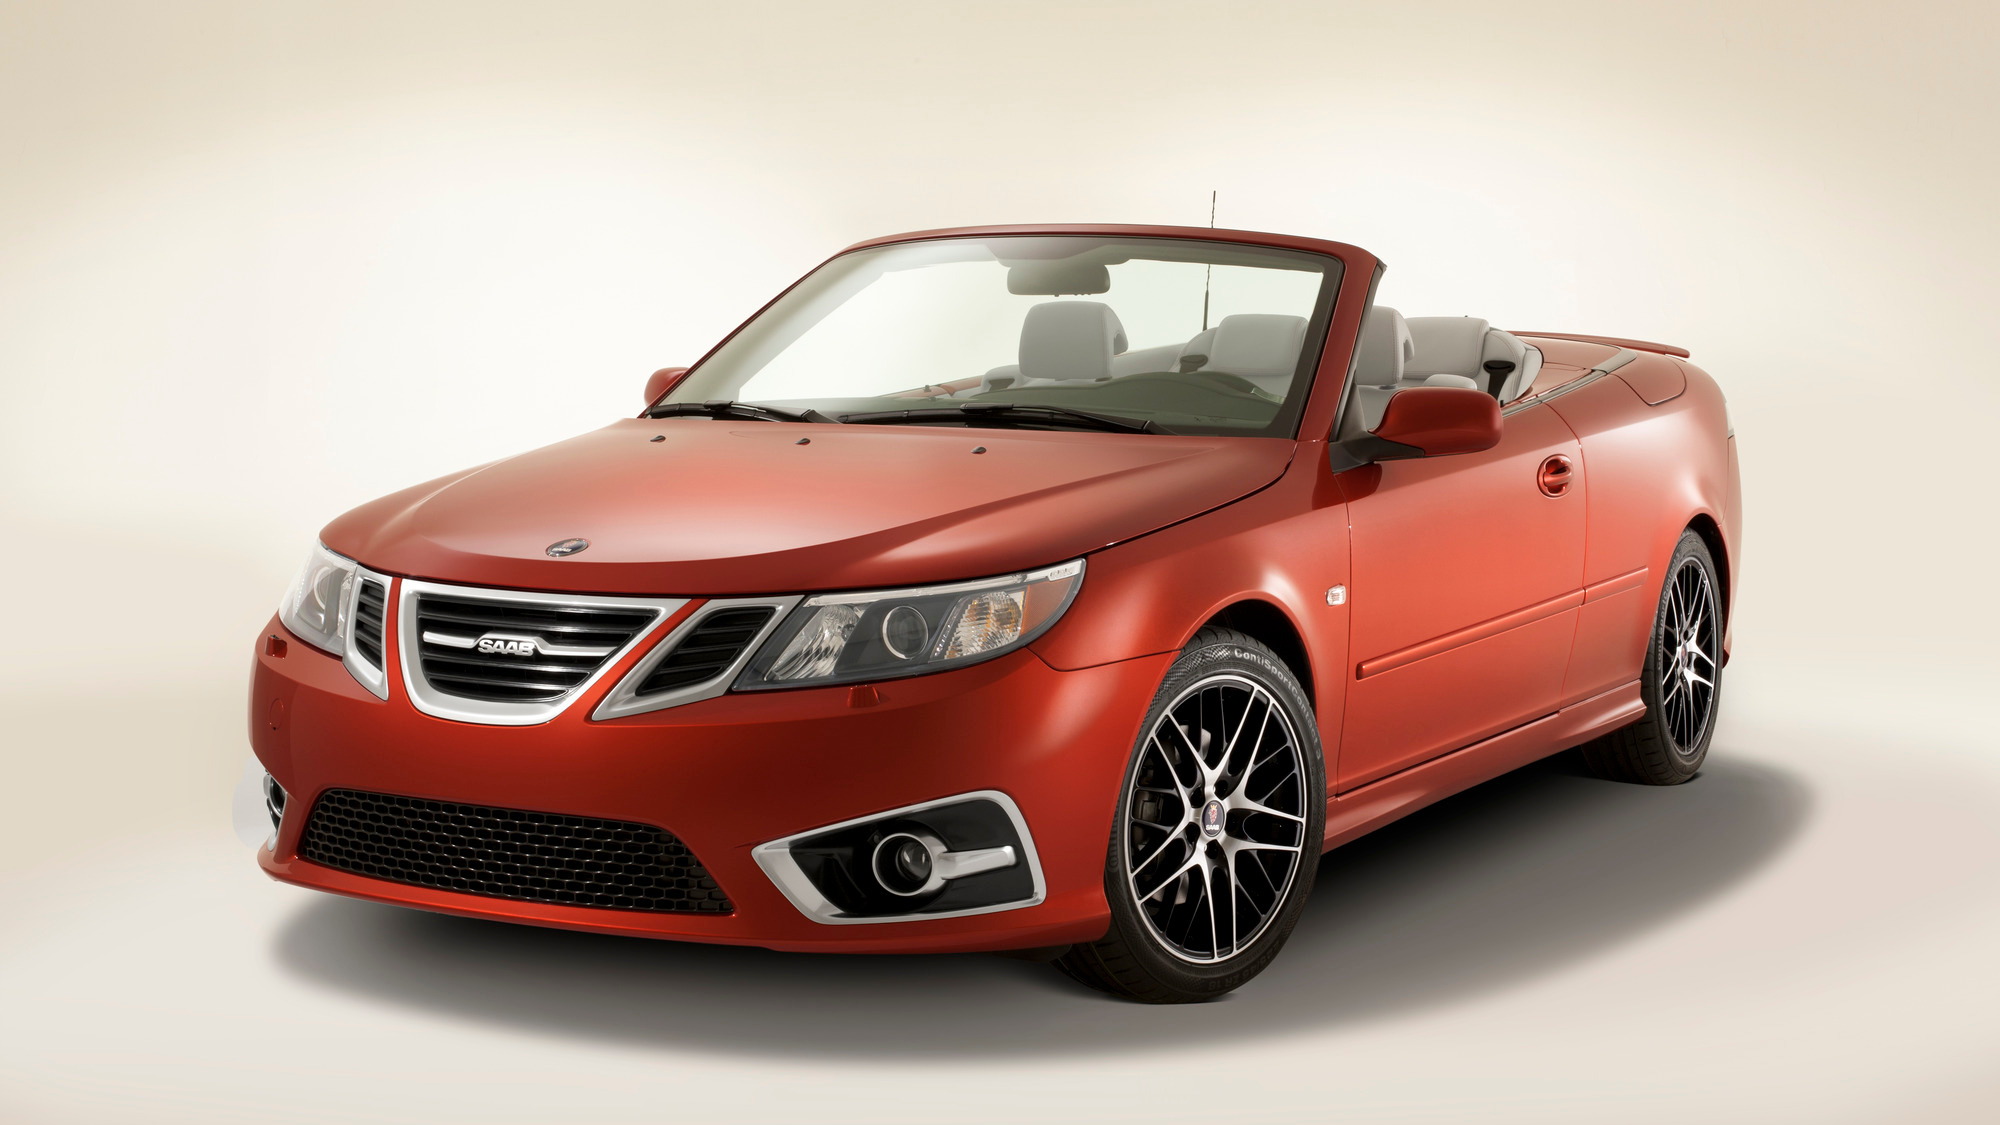 2012 Saab 9-3 Convertible Independence Edition